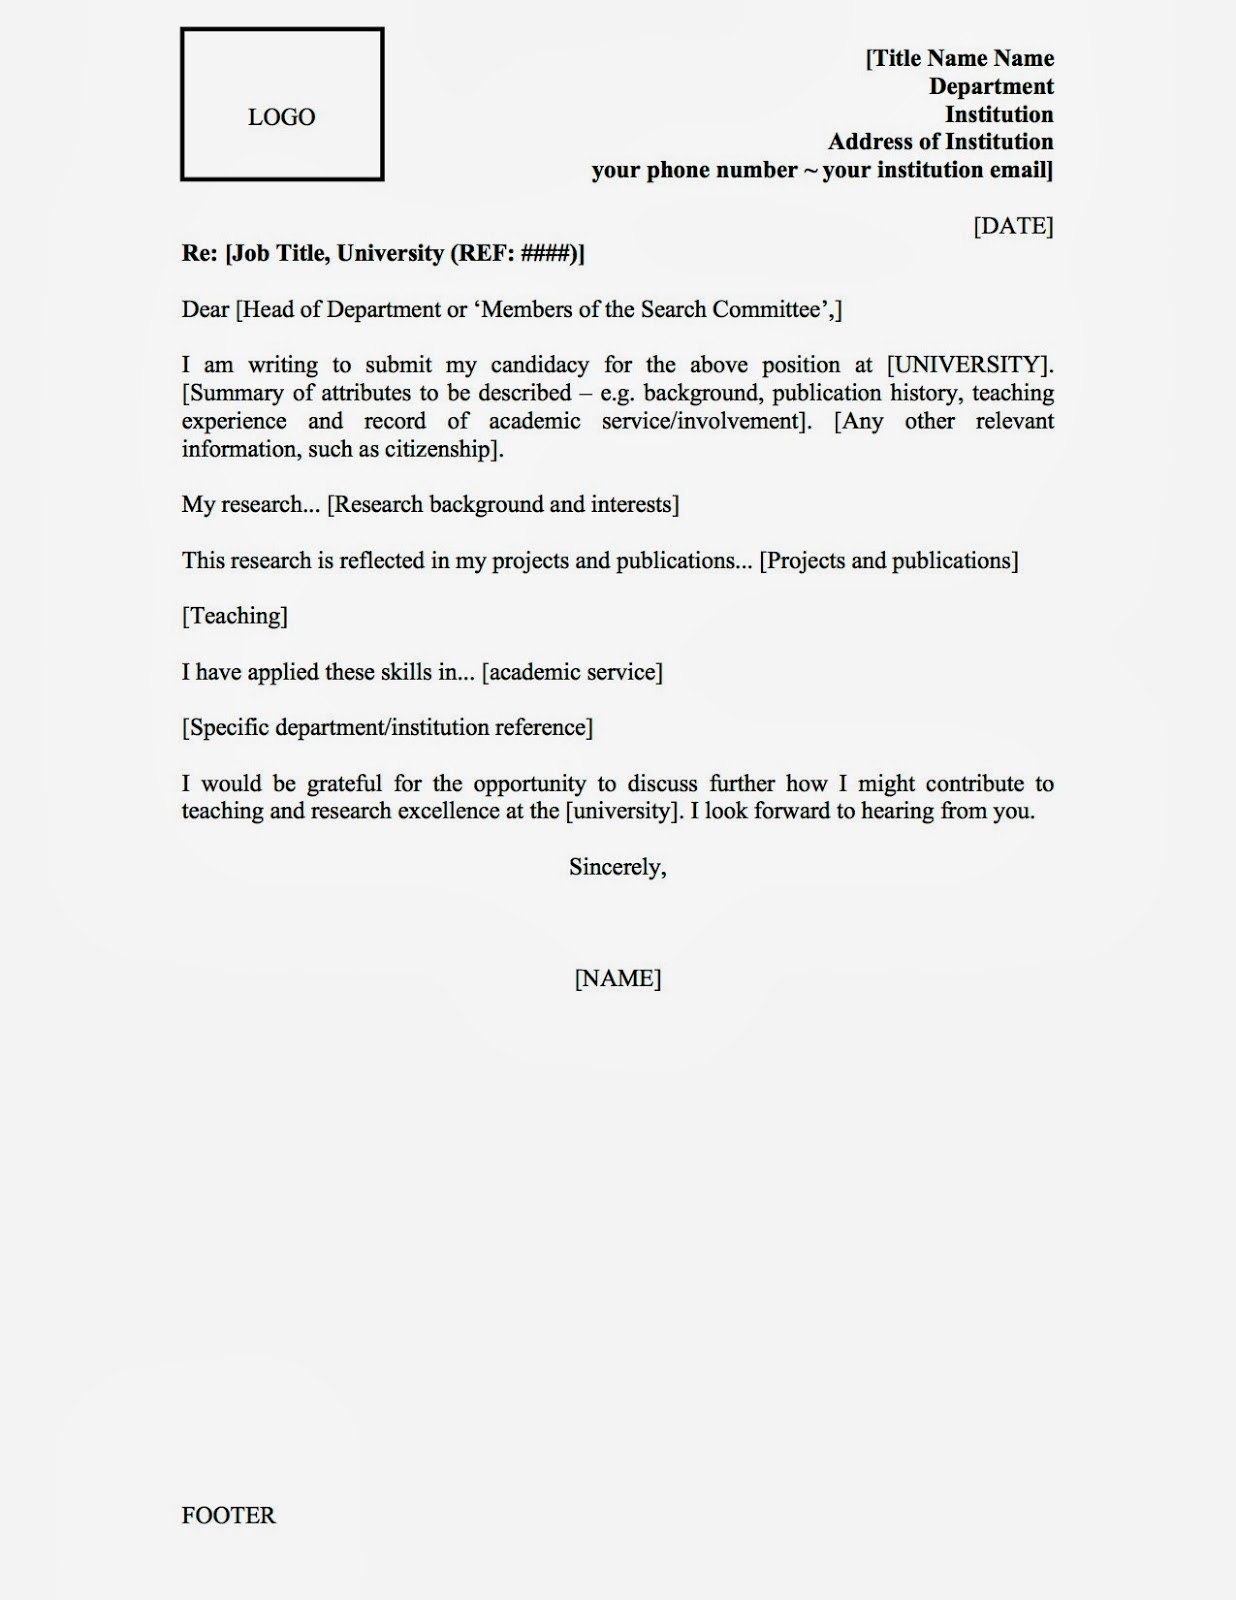 Amazing Cliparts Job Application Letter To Unknown Person intended for sizing 1236 X 1600